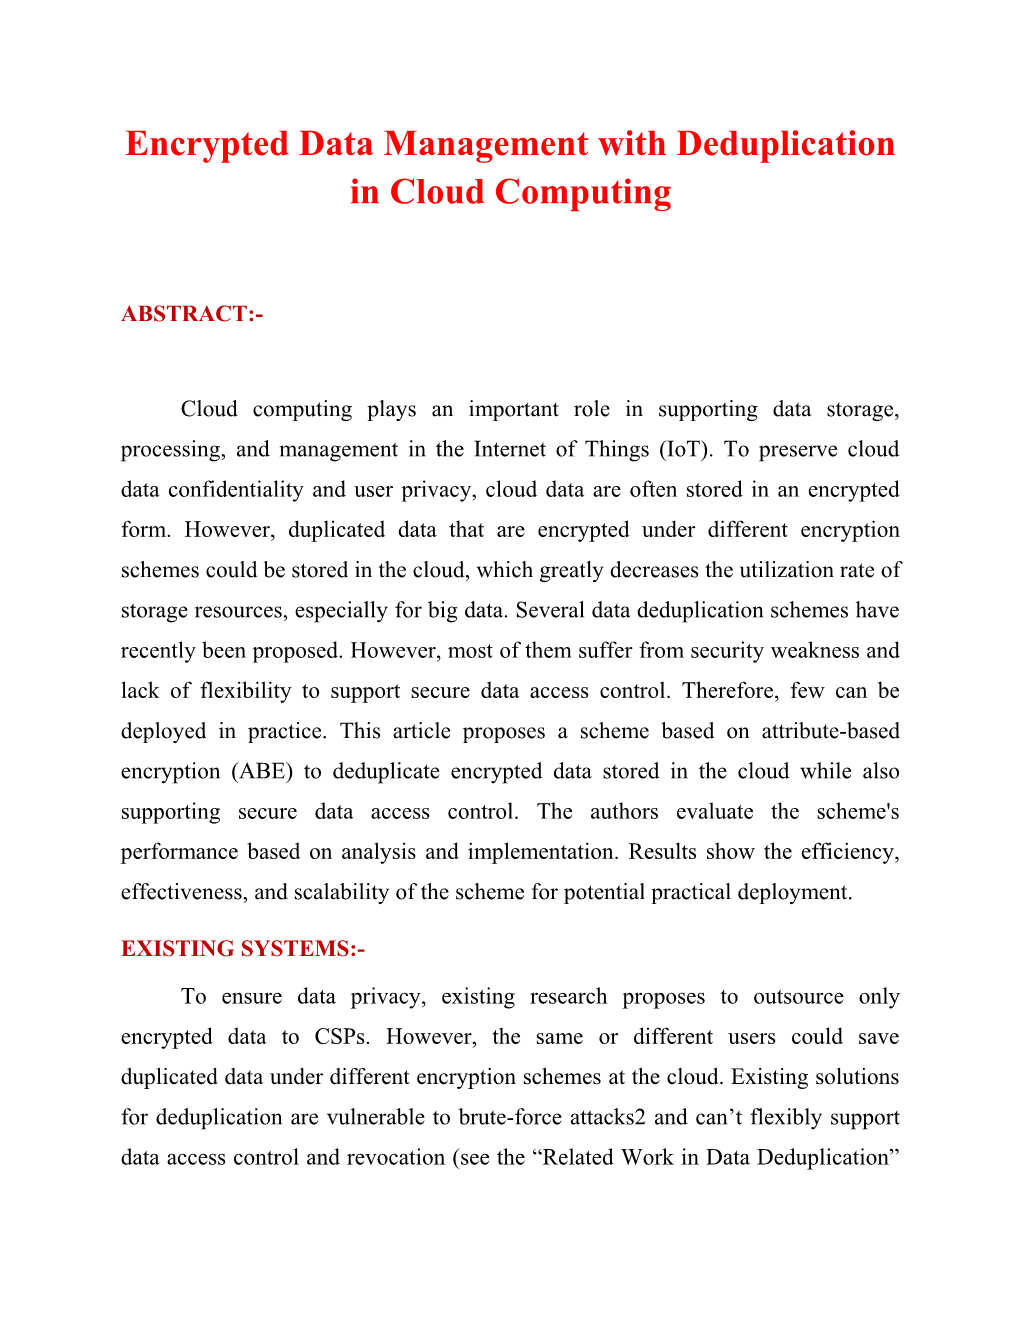 Encrypted Data Management with Deduplication in Cloud Computing